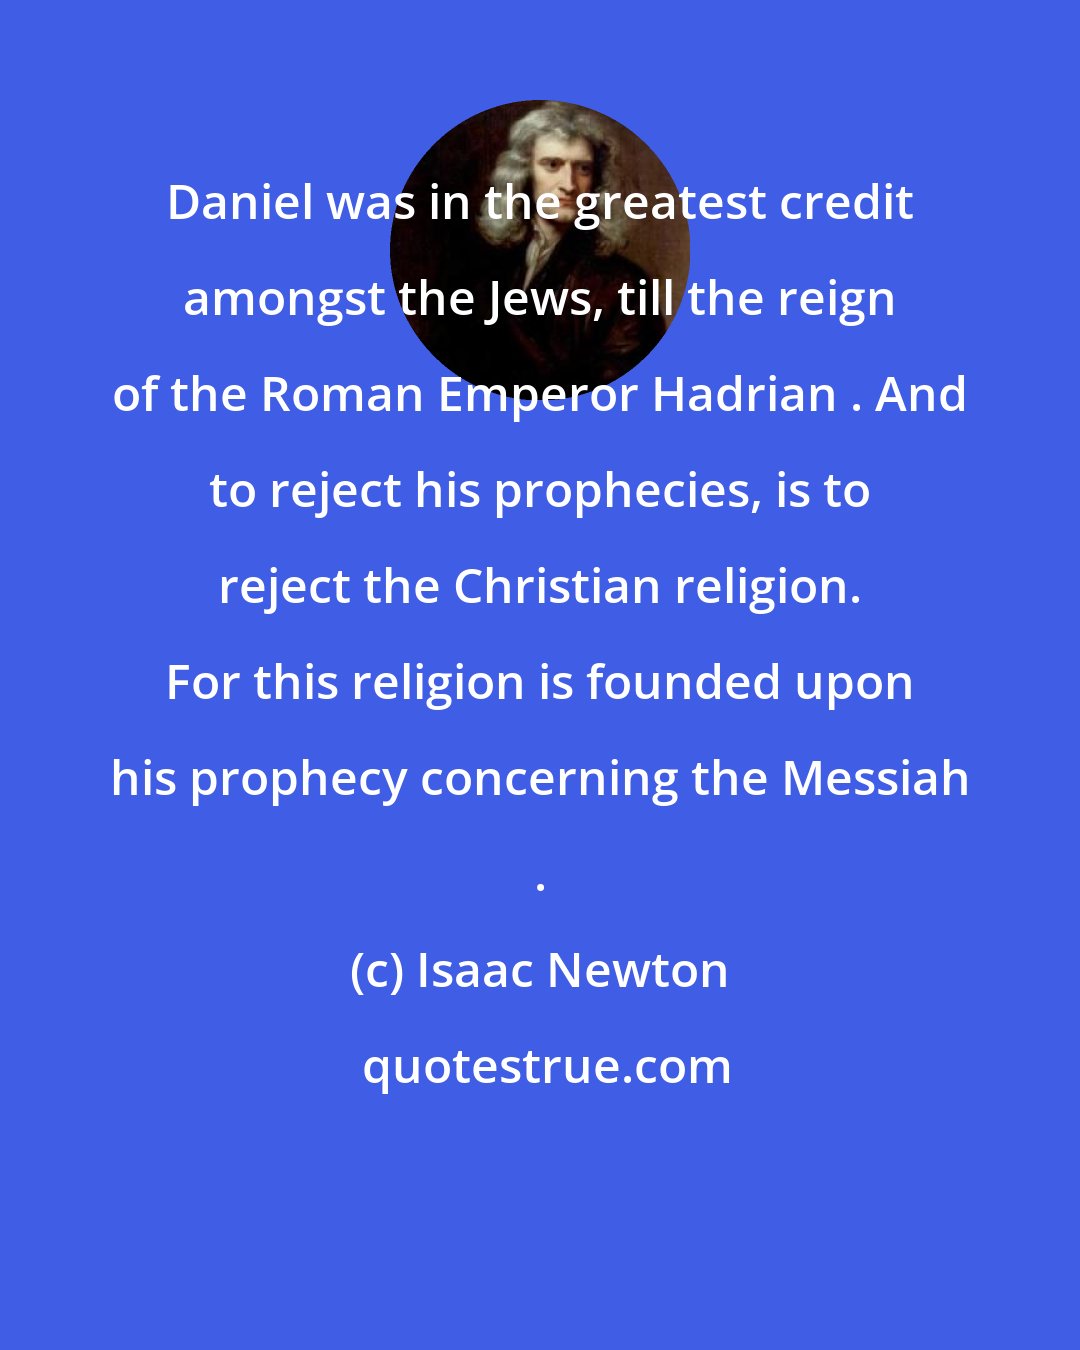 Isaac Newton: Daniel was in the greatest credit amongst the Jews, till the reign of the Roman Emperor Hadrian . And to reject his prophecies, is to reject the Christian religion. For this religion is founded upon his prophecy concerning the Messiah .